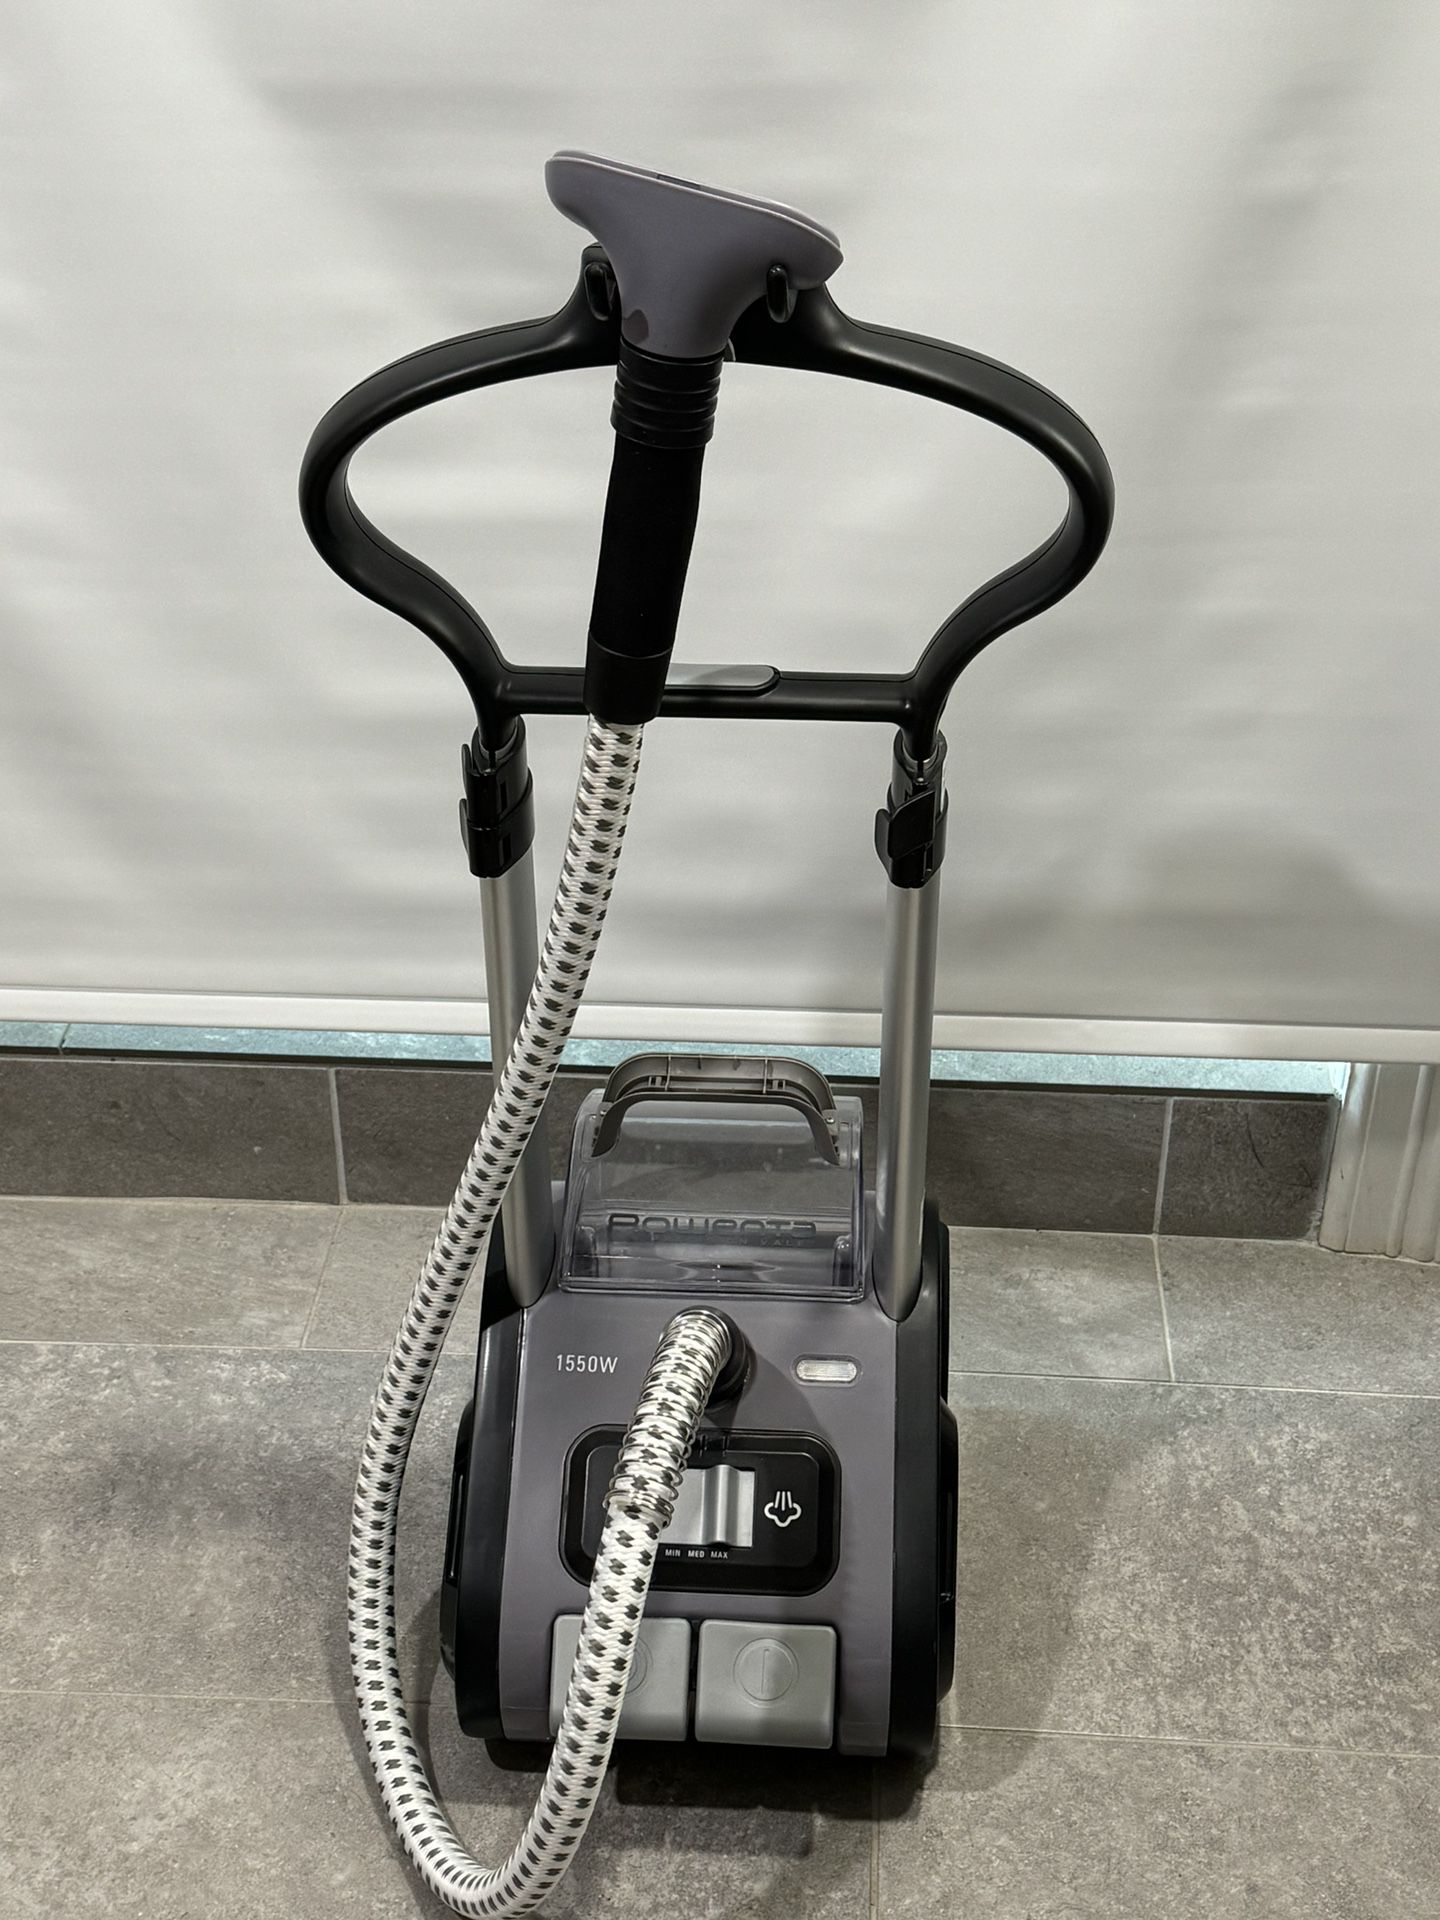 Rowenta IS9100 Precision Valet Commercial/Home Size Garment Steamer with Retractable Cord